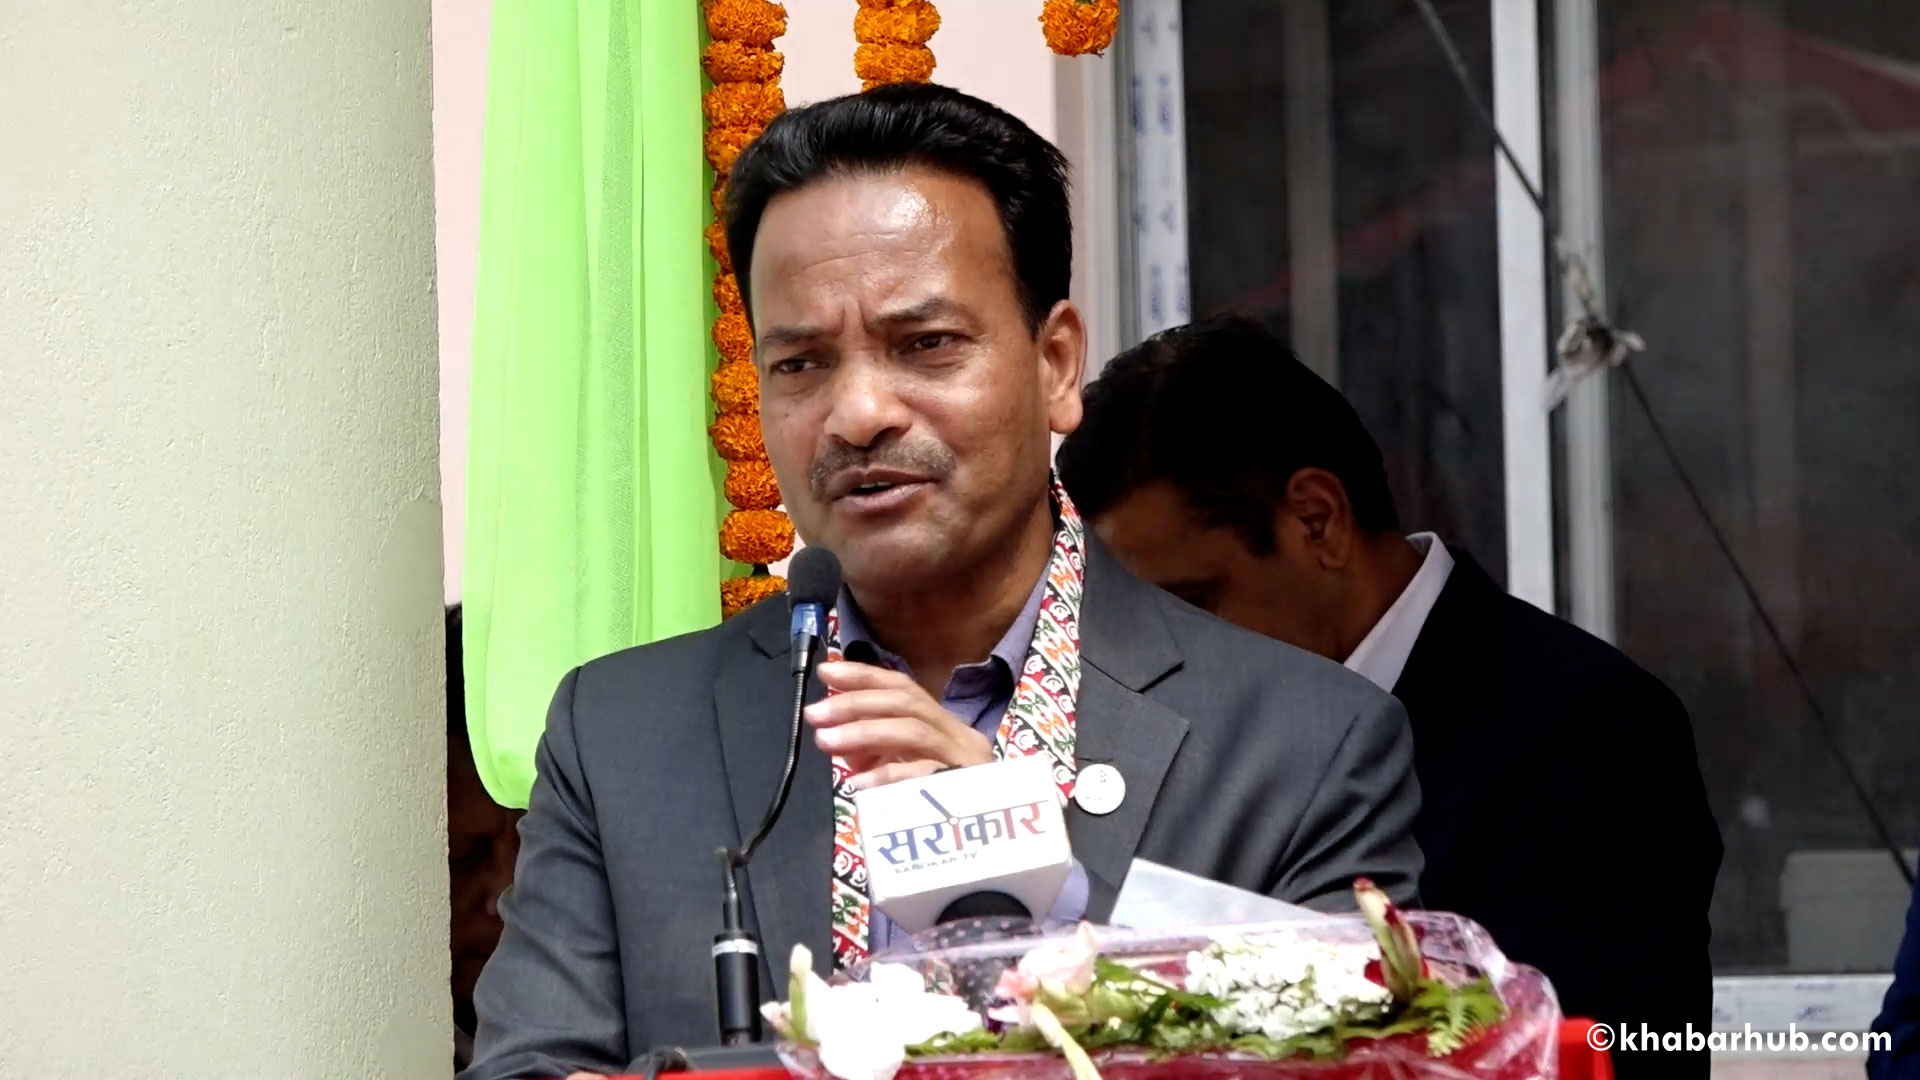 Administration should understand importance of sports for its development: Minister Gahatraj